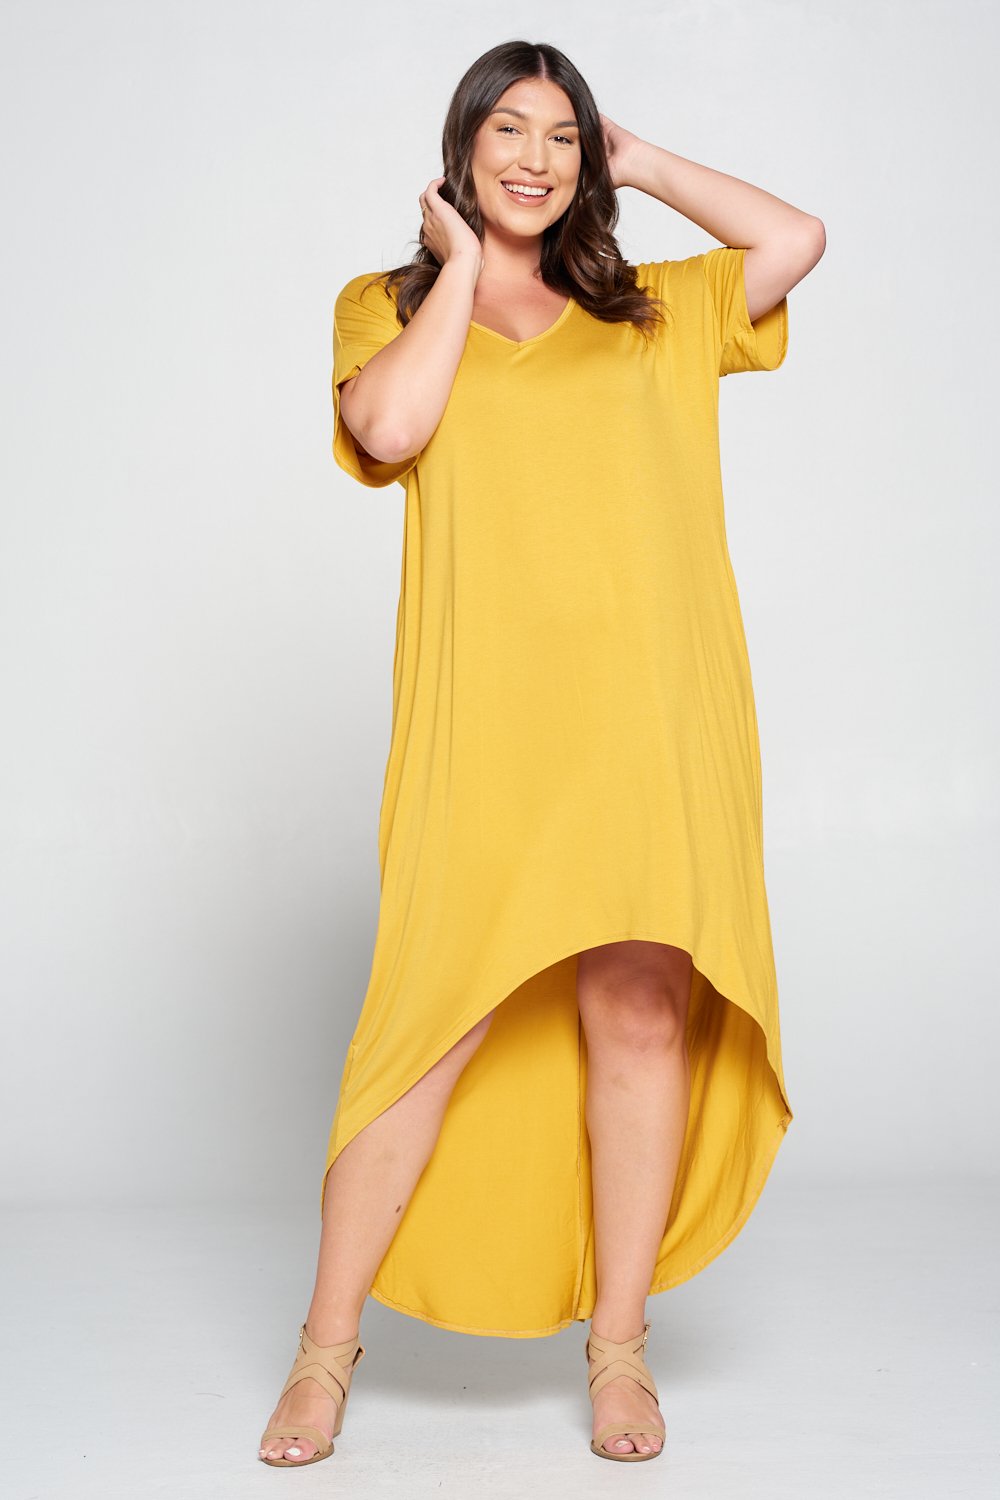 livd L I V D women's contemporary plus size clothing high low hi lo dress with pockets v neck sleeves in mustard yellow